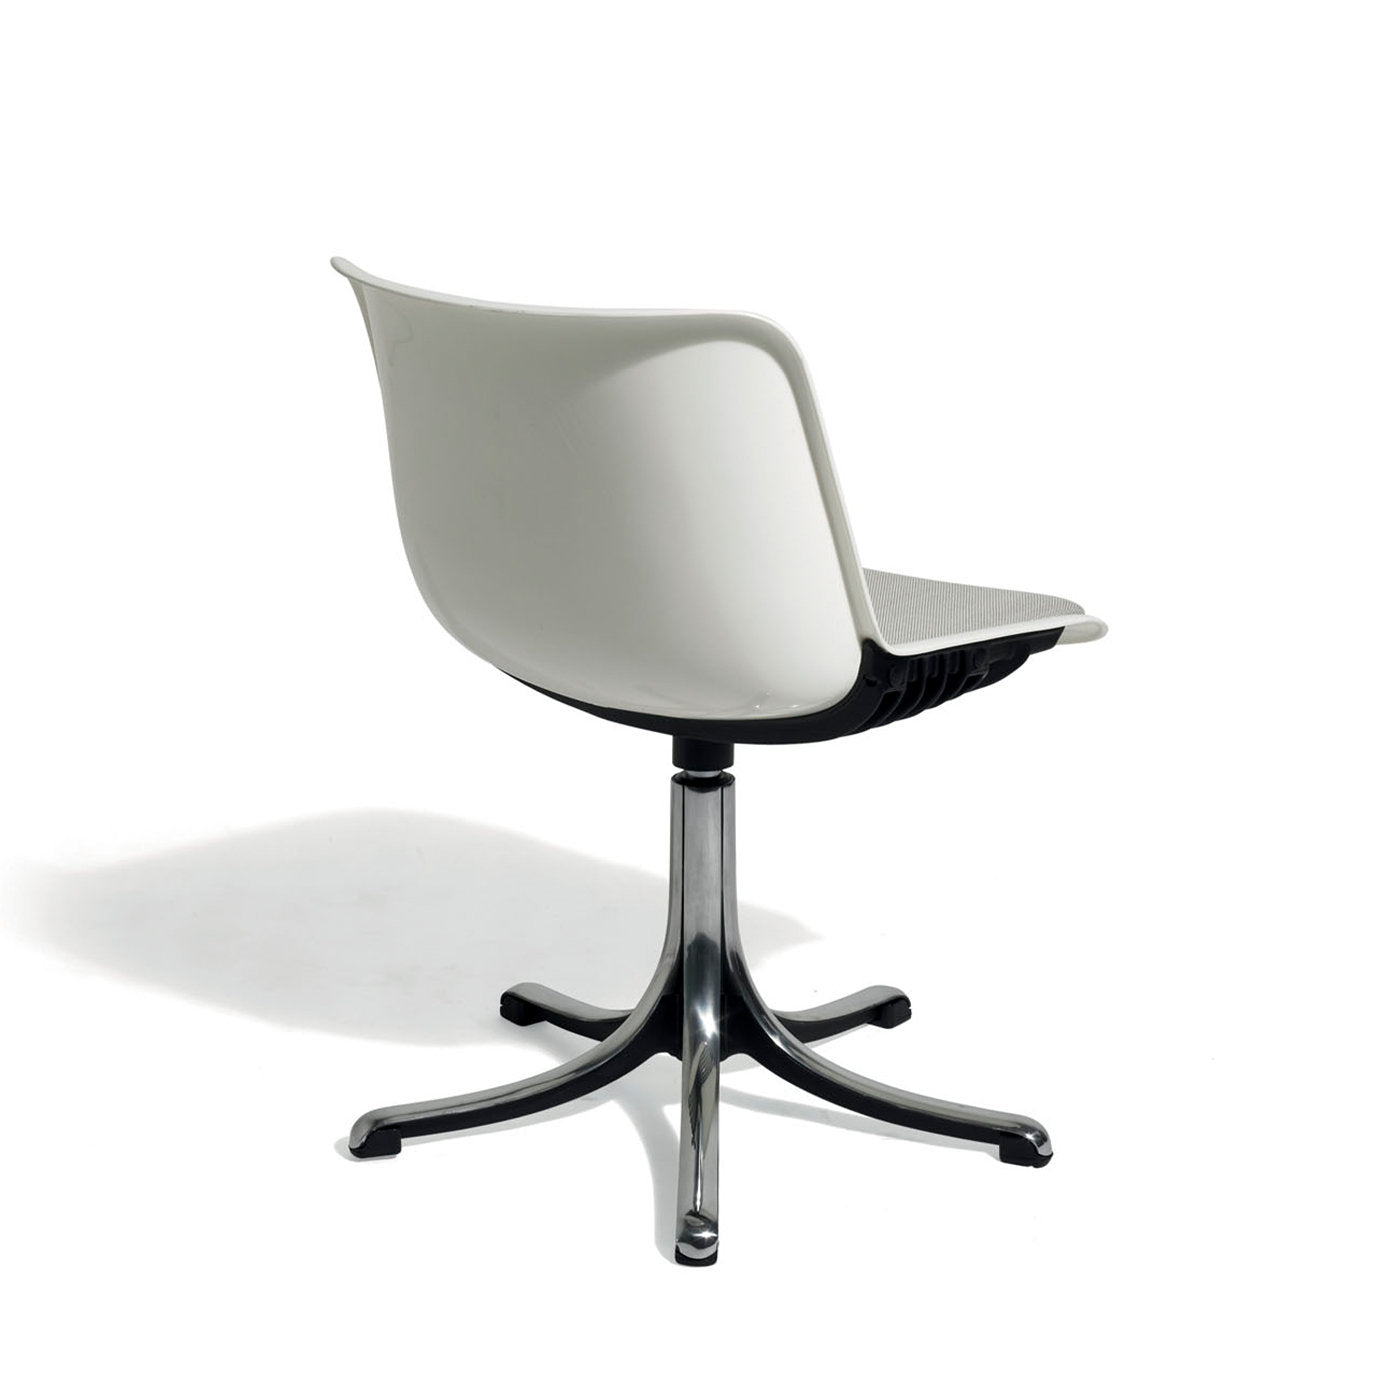 Modus White Chair with Gray Seat Cushion by Centro Progetti Tecno - Alternative view 3